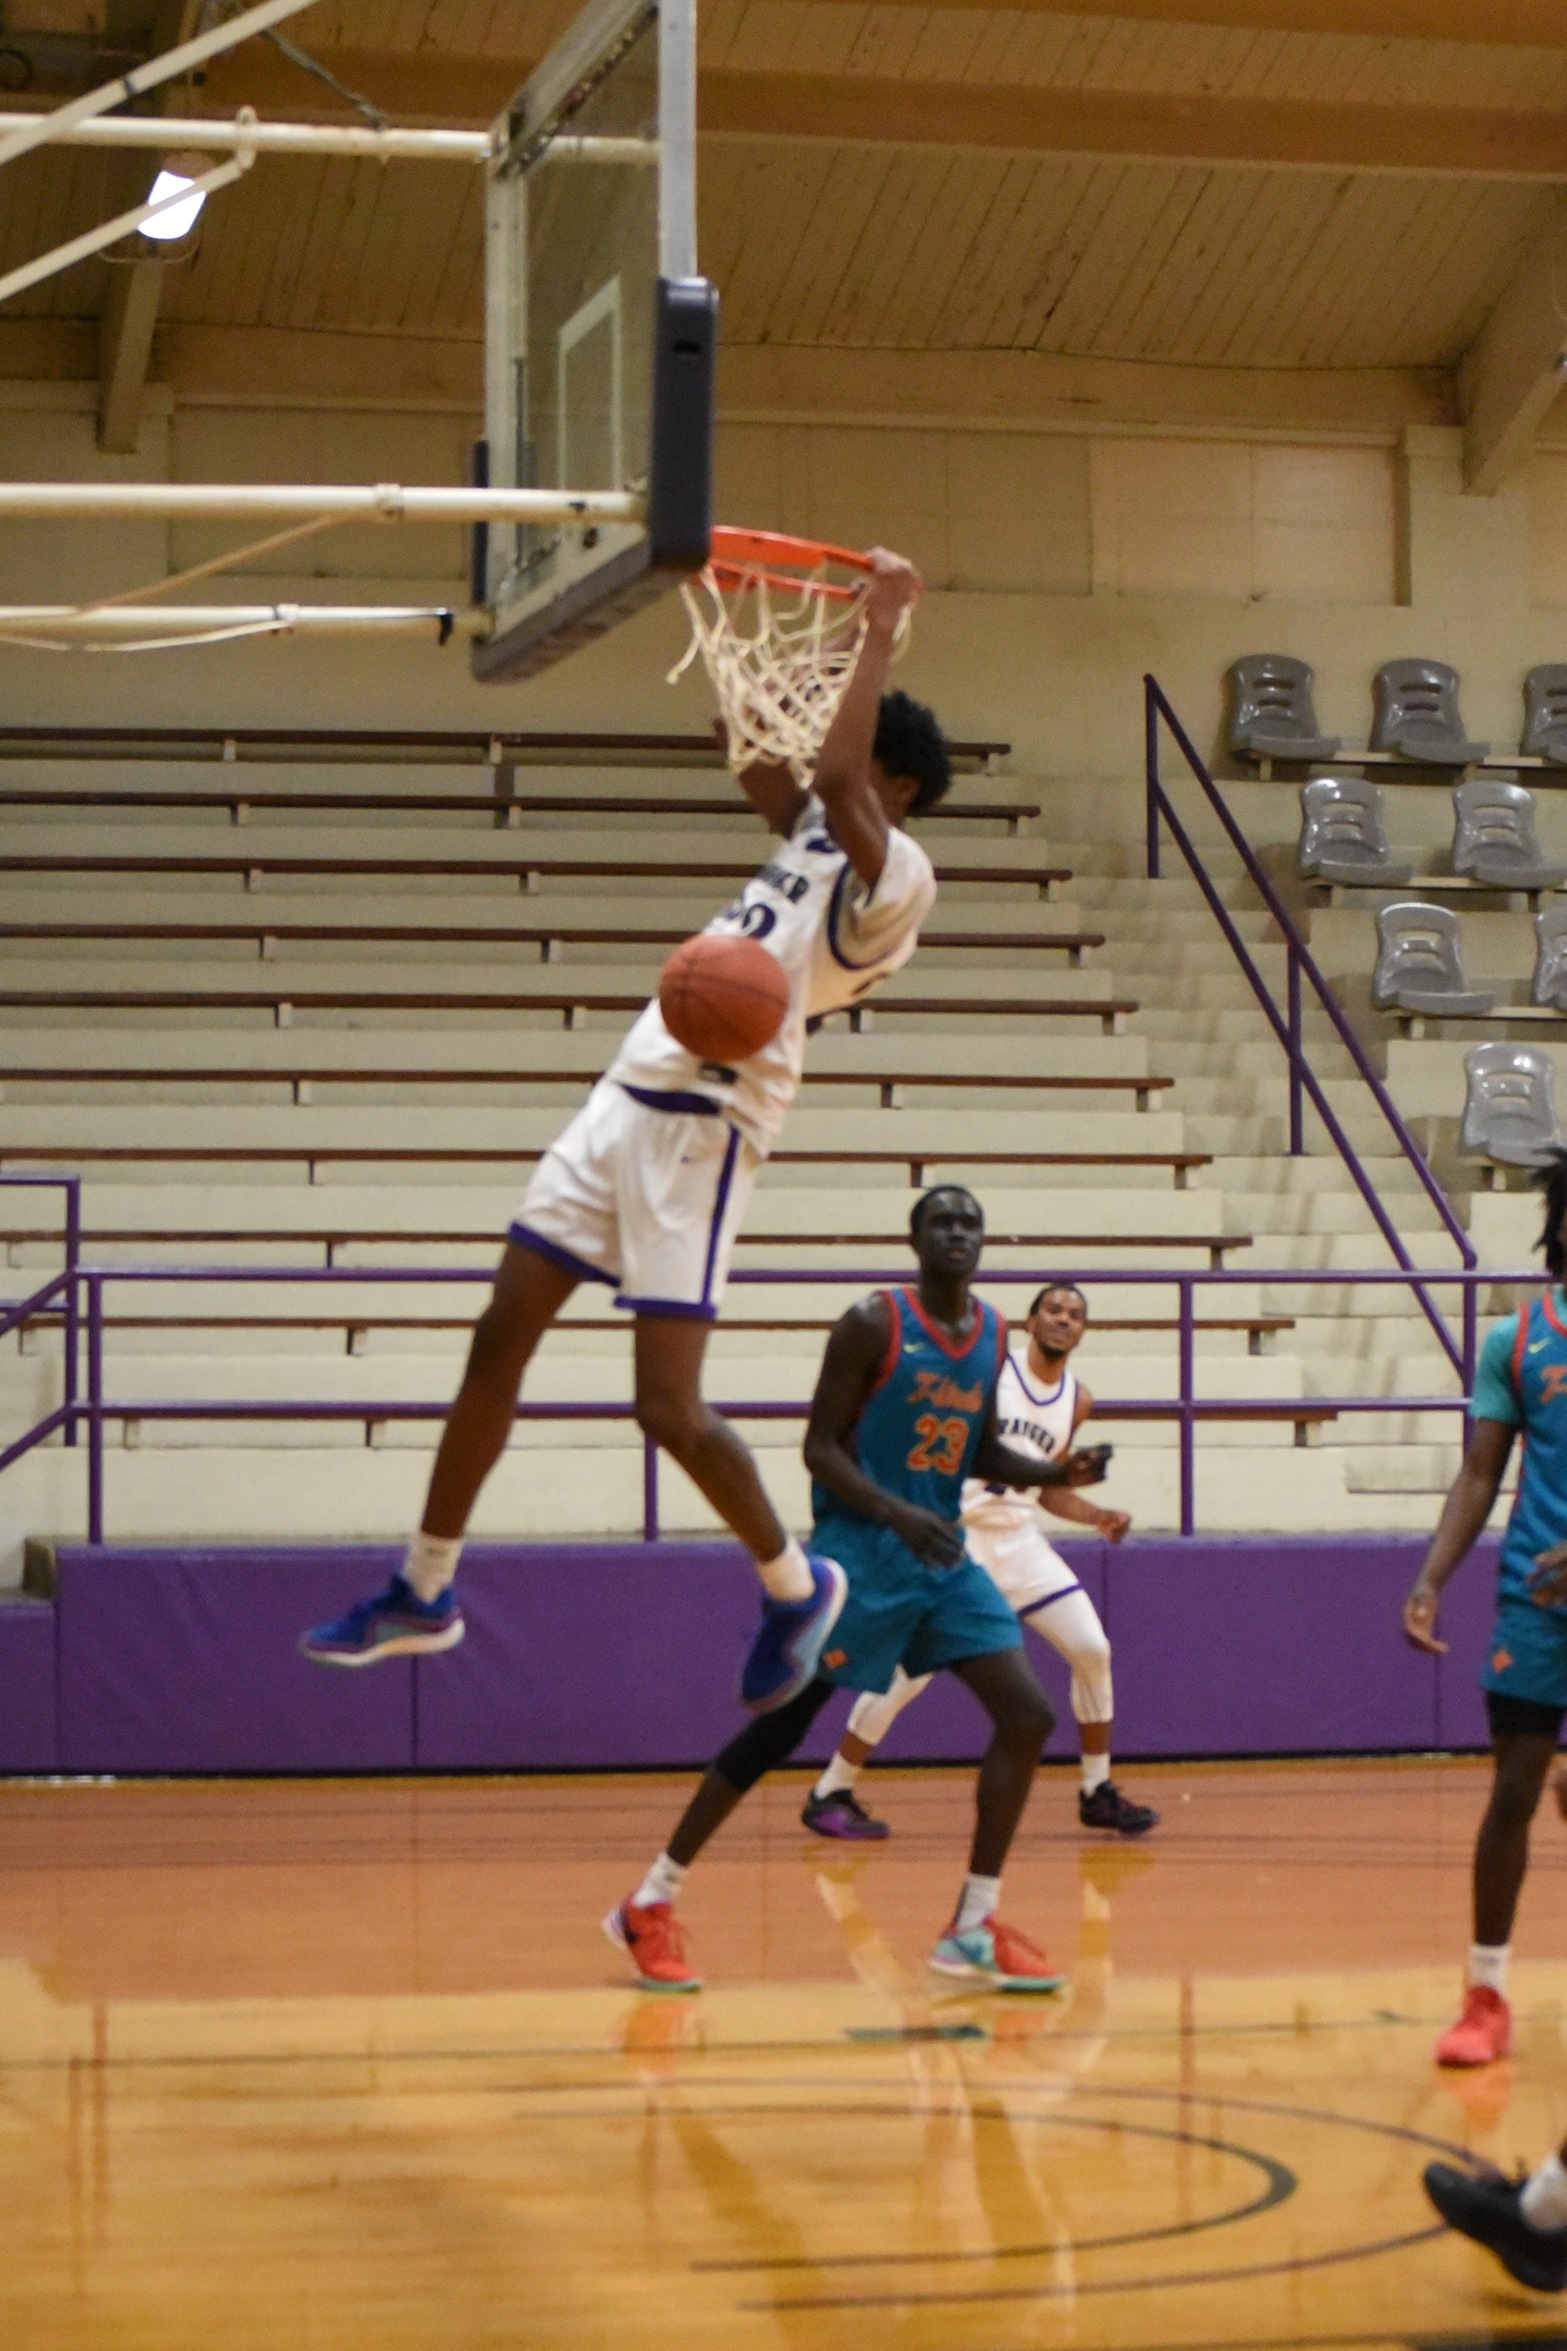 Ranger College defeated Southwestern Christian College in overtime with a final score of 68-67